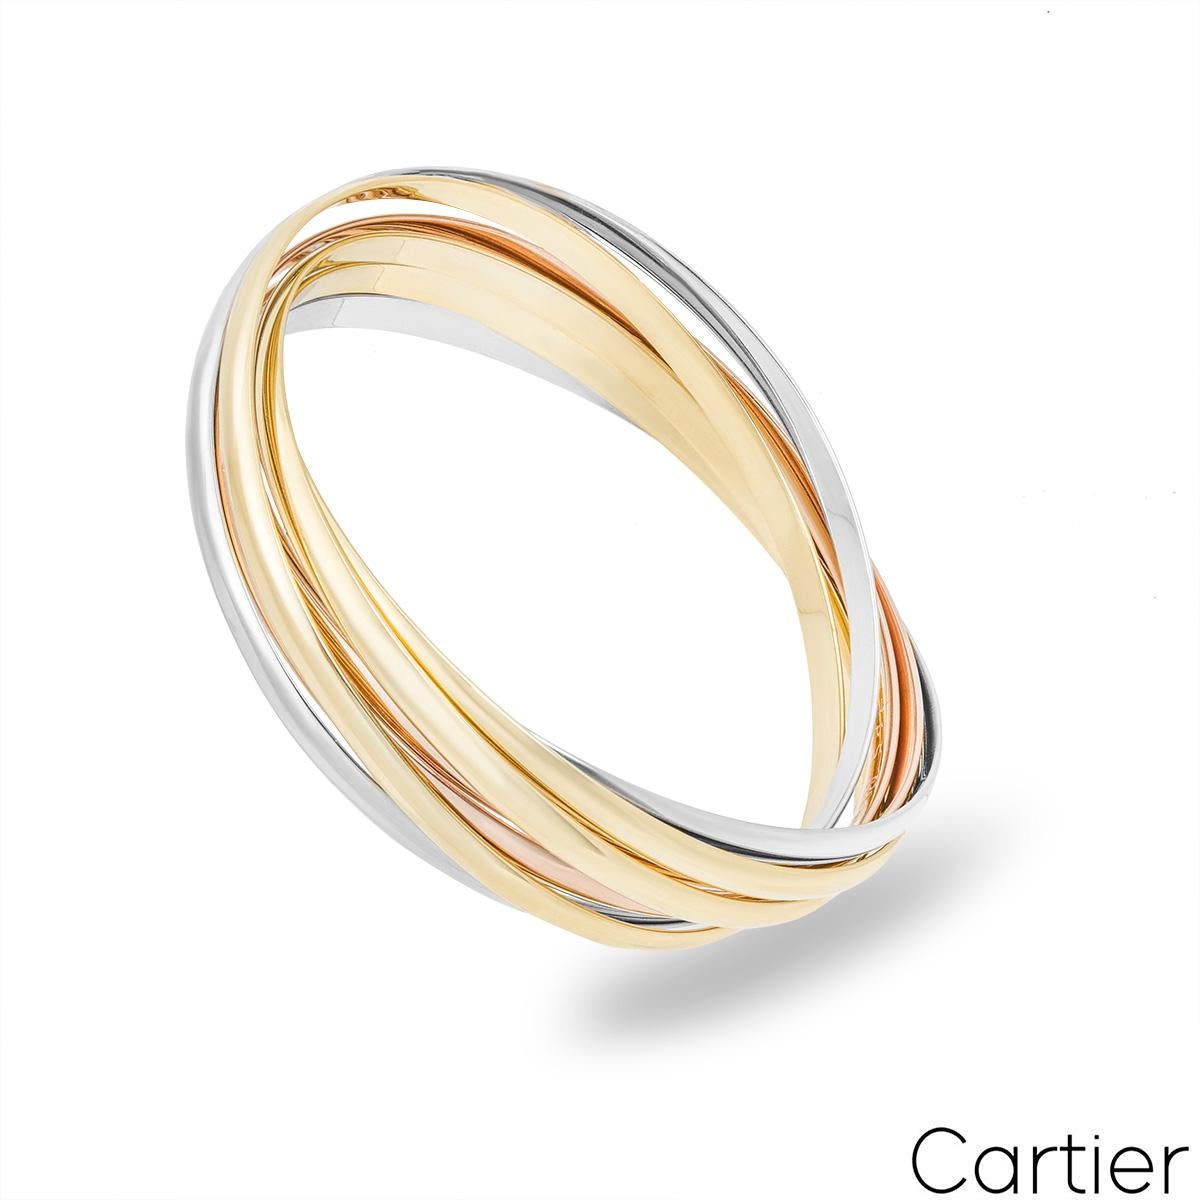 An iconic 18k tri-colour Cartier bracelet from the Trinity De Cartier collection. The bracelet is made up of seven intertwined 18k white, rose and yellow gold 3.5mm bands. The bracelet fits a wrist size of up to 18.5cm and has a gross weight of